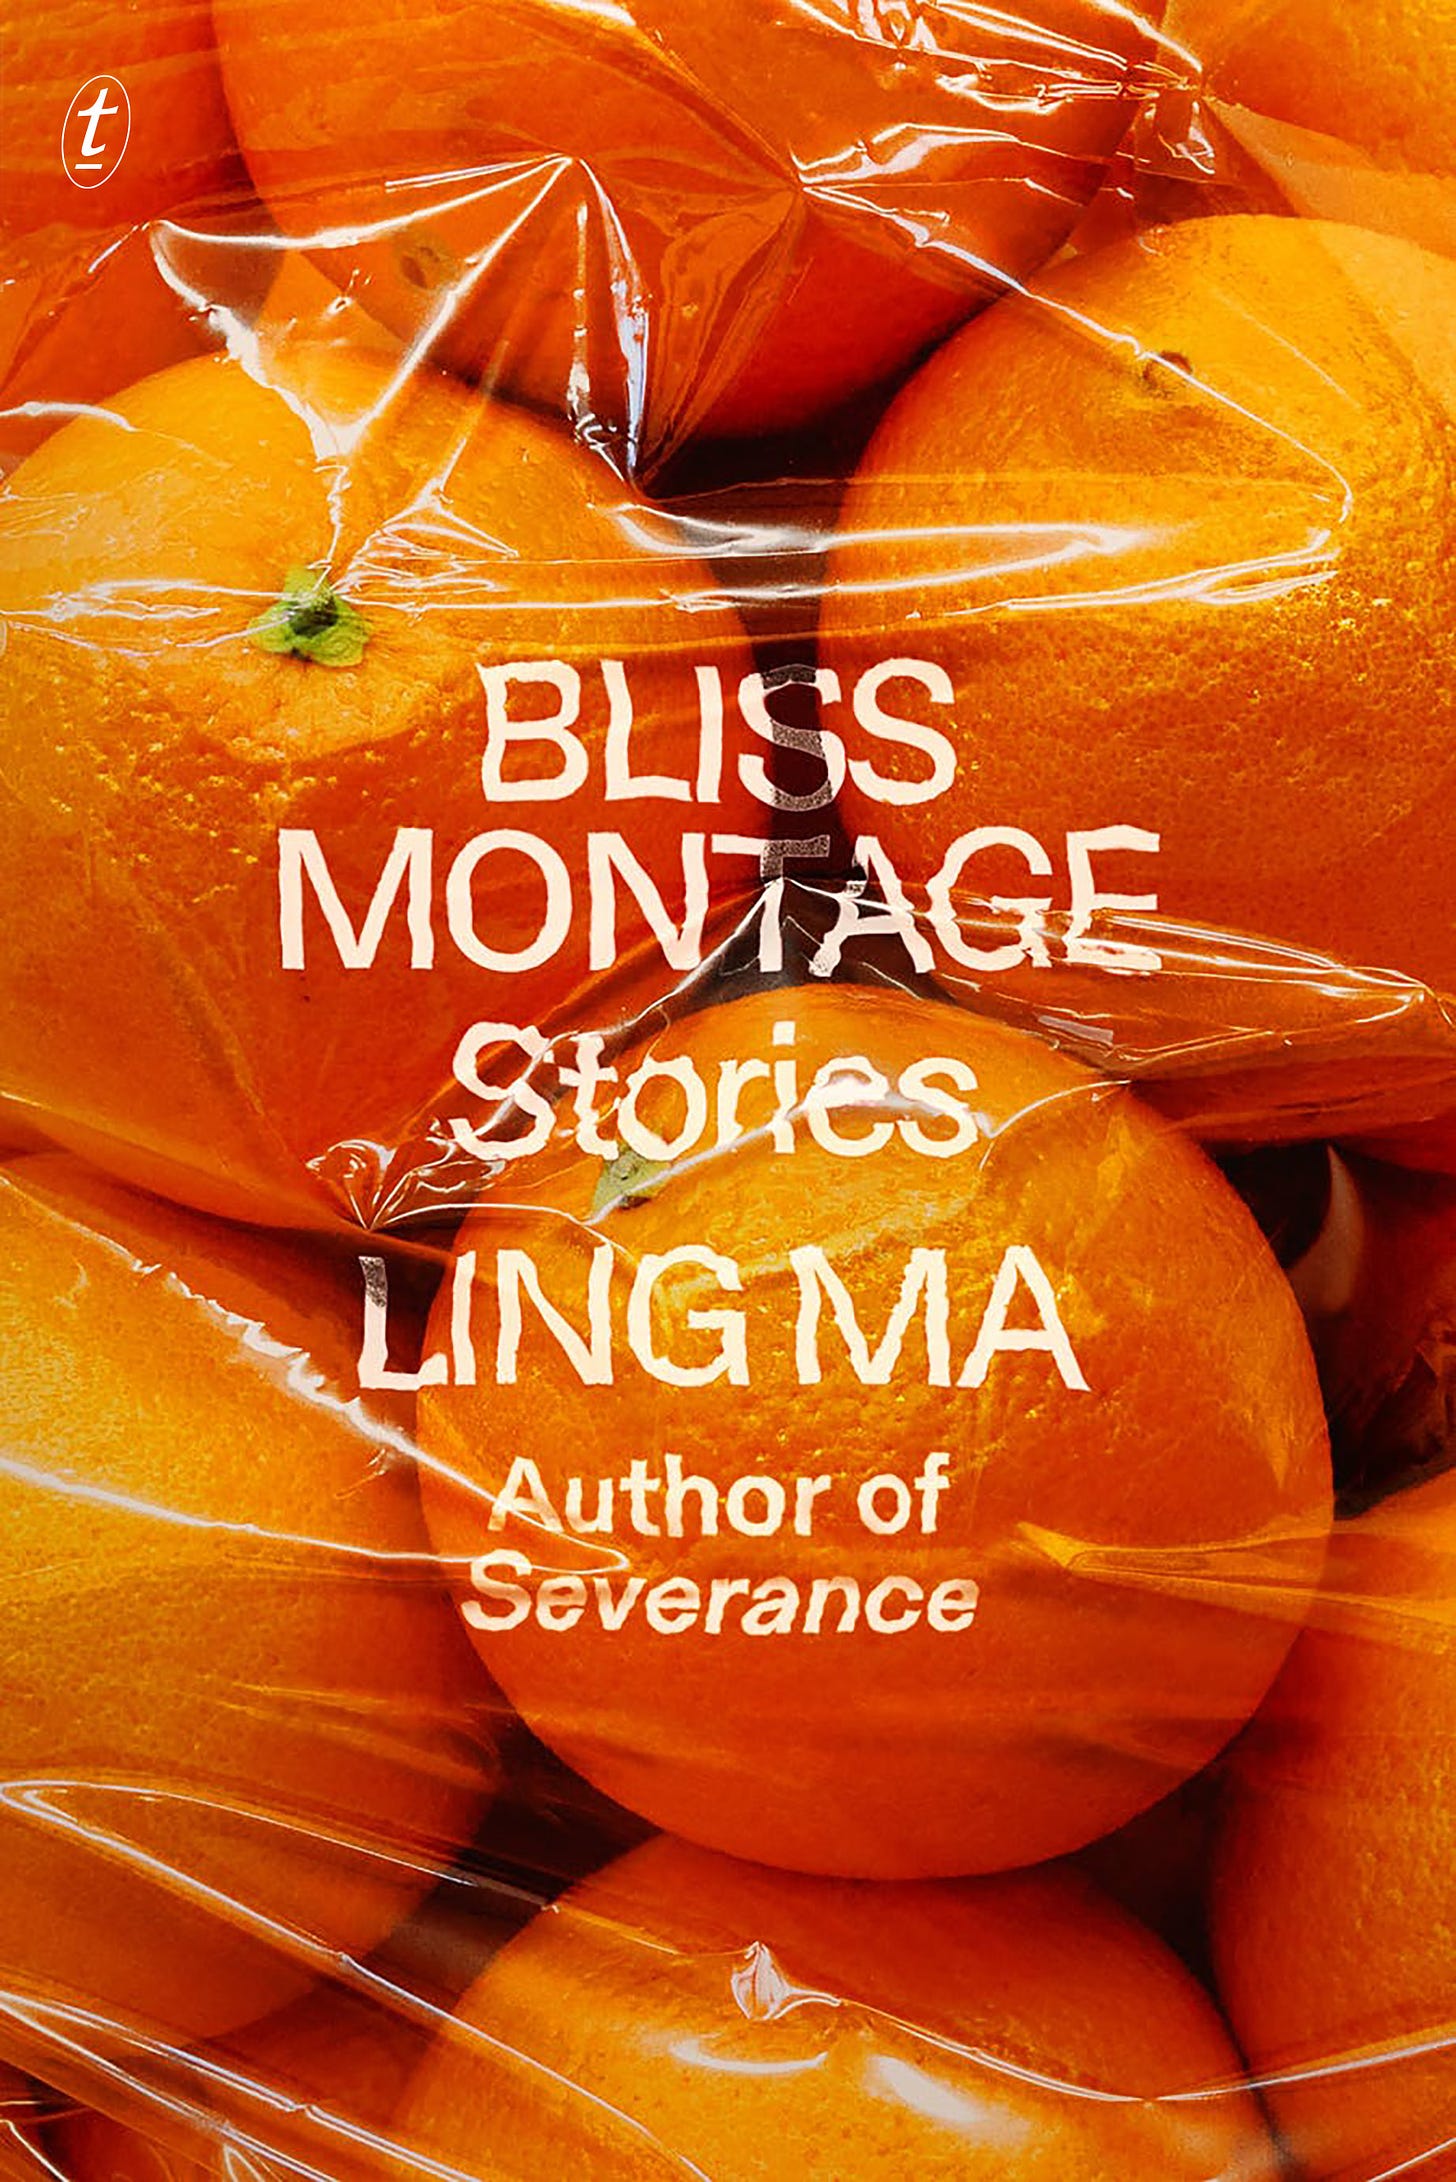 Cover of Ling Ma's short story collection, Bliss Montage, which features a bag of oranges overlaid with the name of the book and the author's name in white font